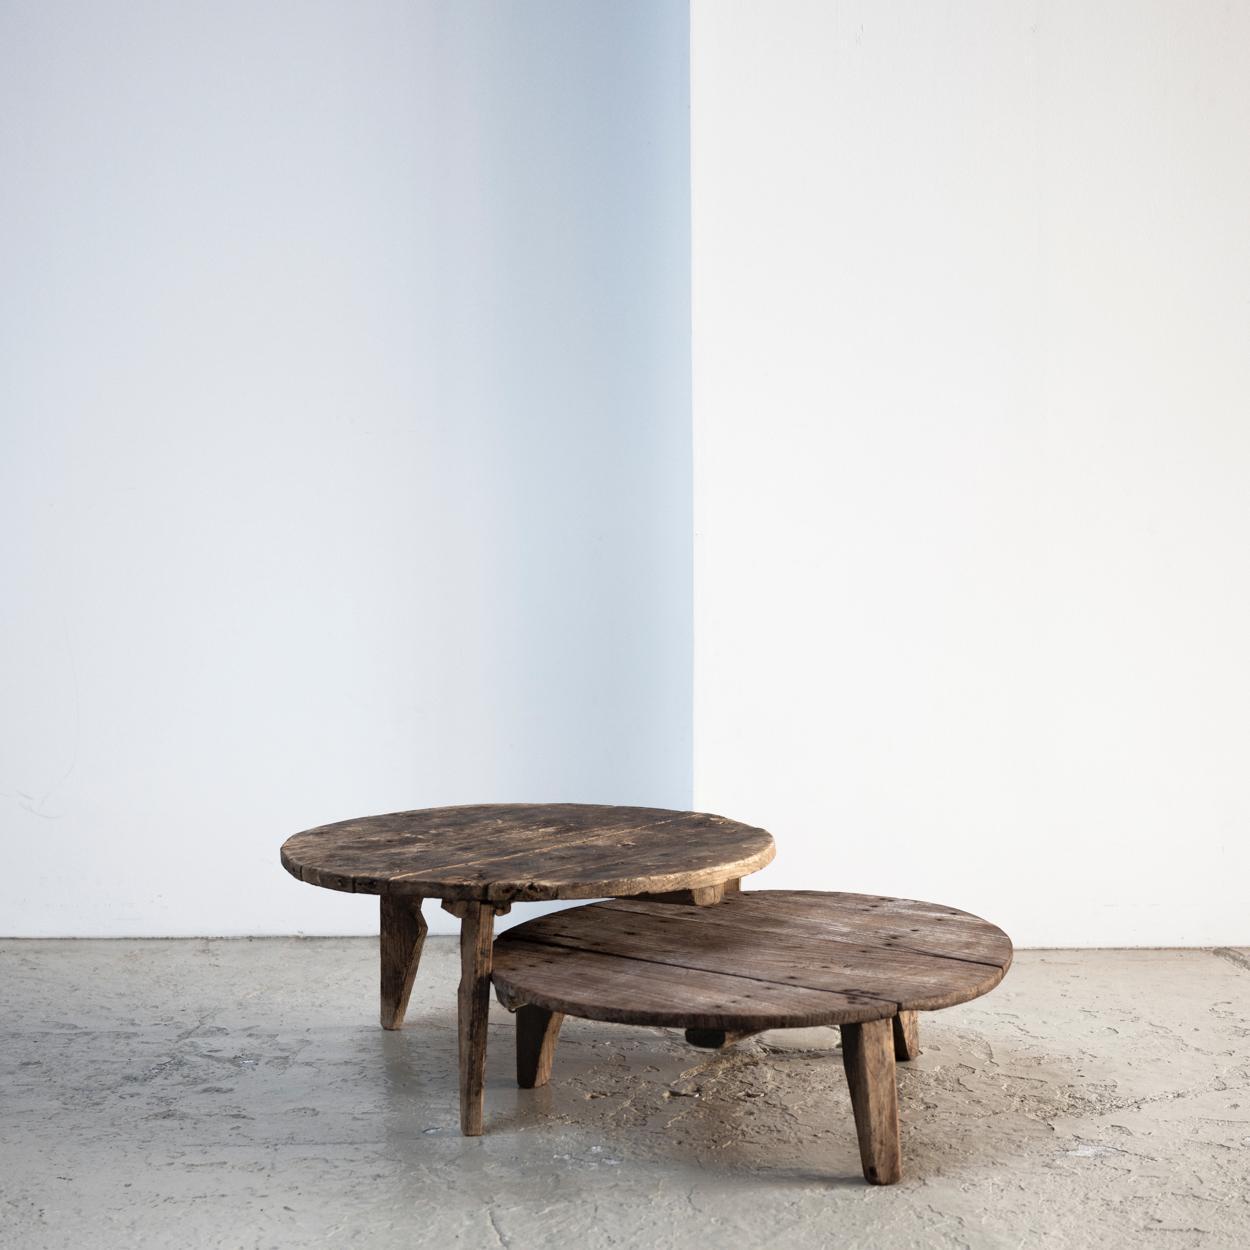 A set of two antique primitive coffee tables.
Can be used together or separately.
Matches perfectly with modern furniture.

Measures: Left: 68 x 68 x 33 cm
Right: 68.5 x 68.5 x 22.5 cm.